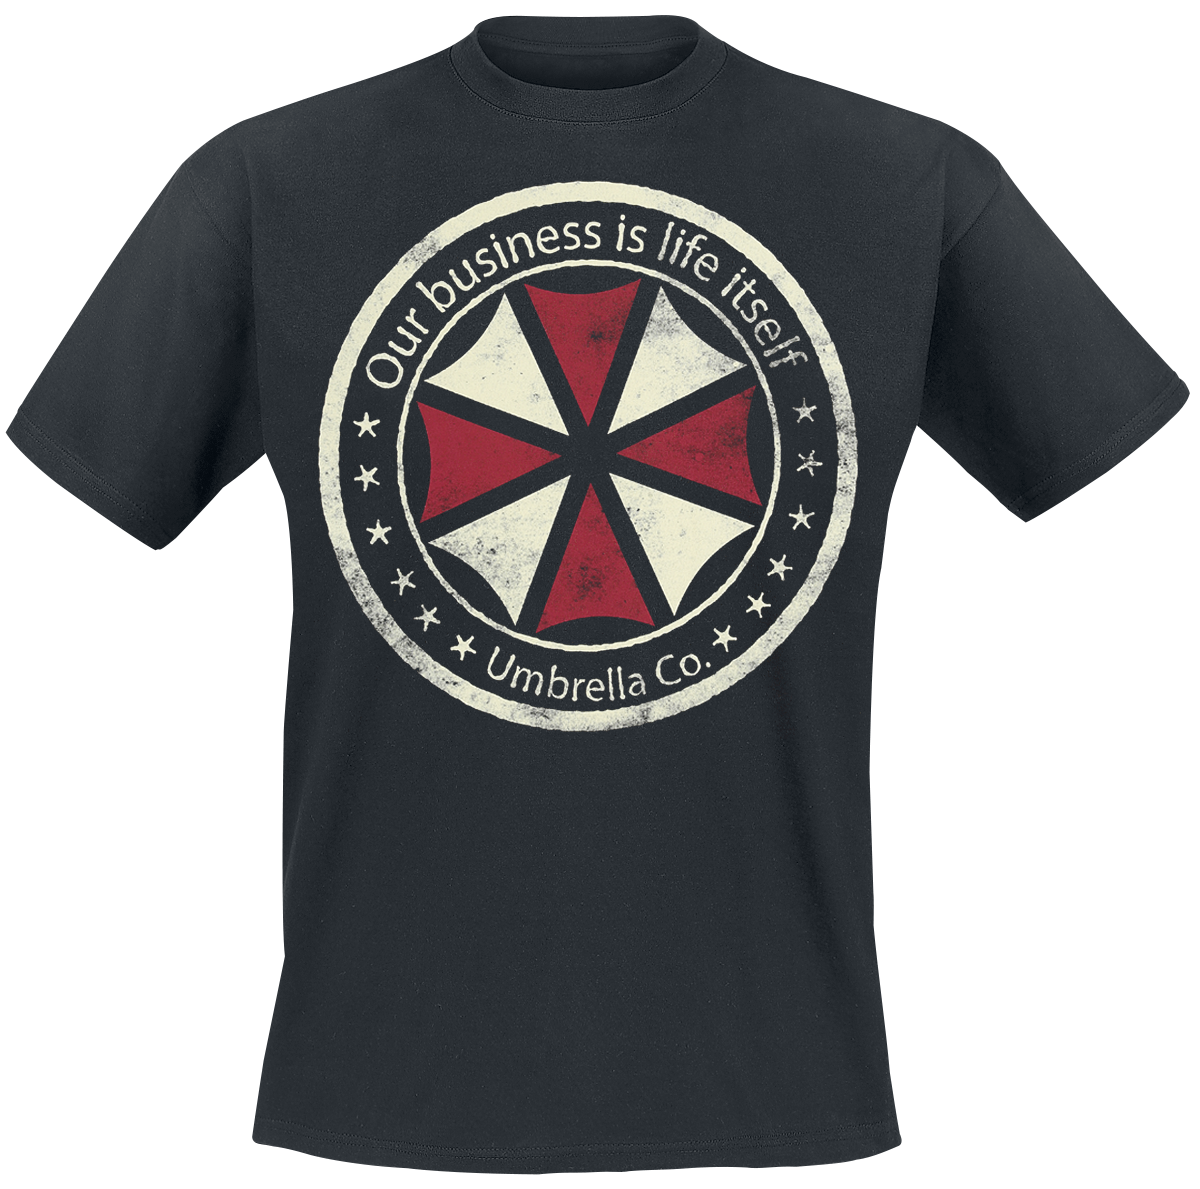 Resident Evil - Umbrella Co. - Our Business Is Life Itself - T-Shirt - schwarz